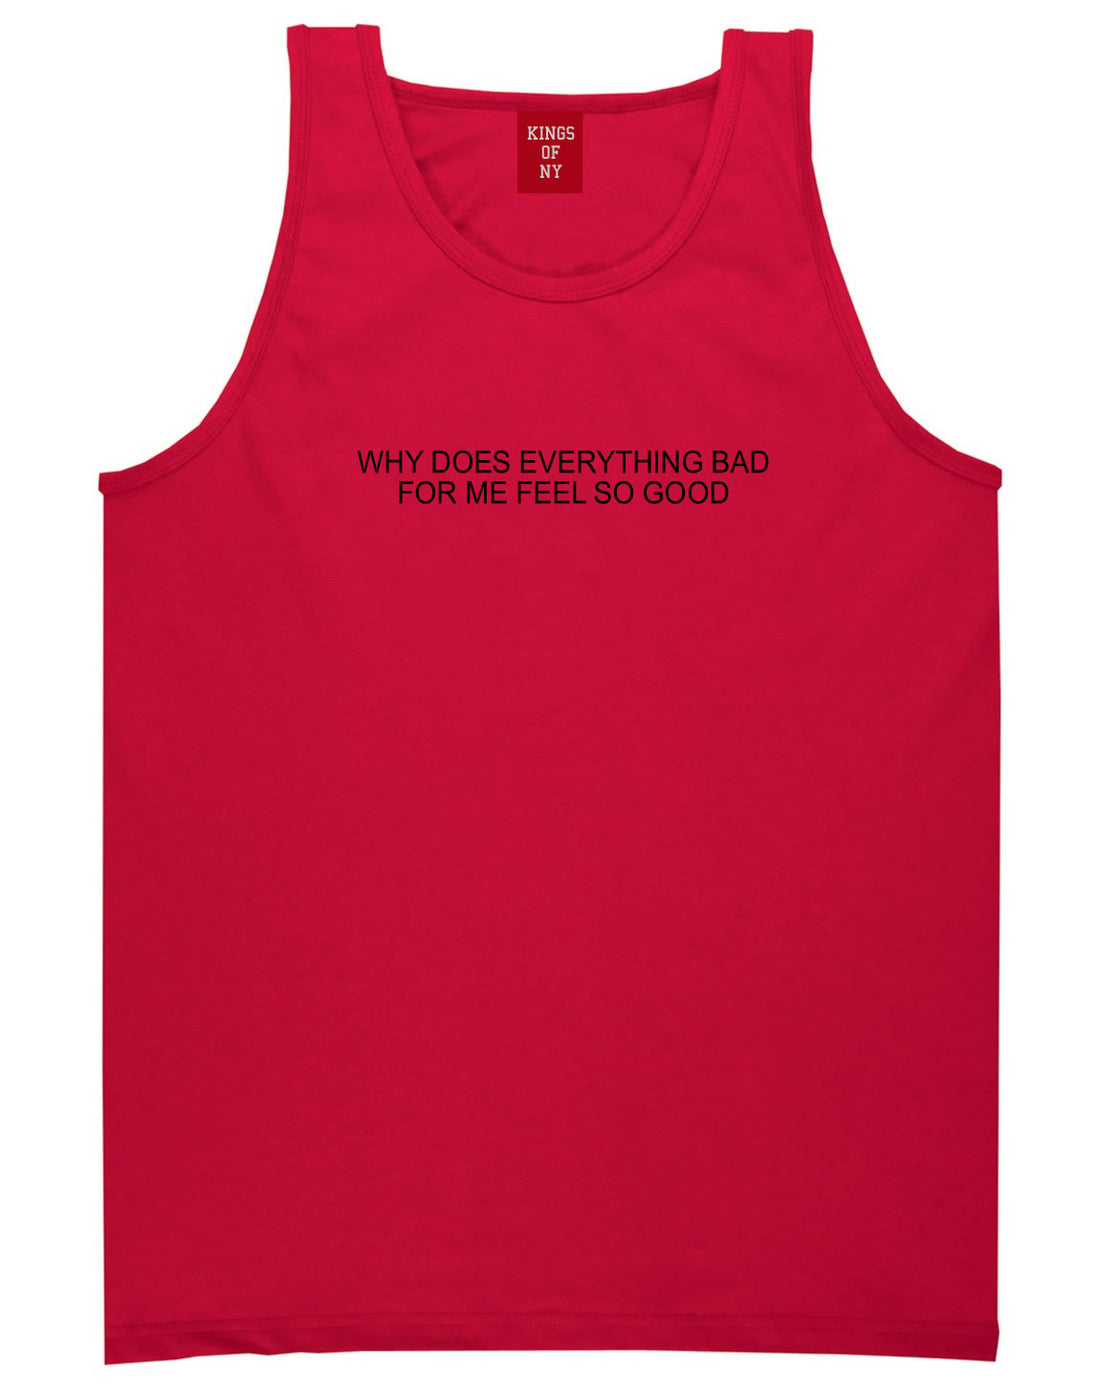 Why Does Everything Bad For Me Feel So Good Mens Tank Top Shirt Red